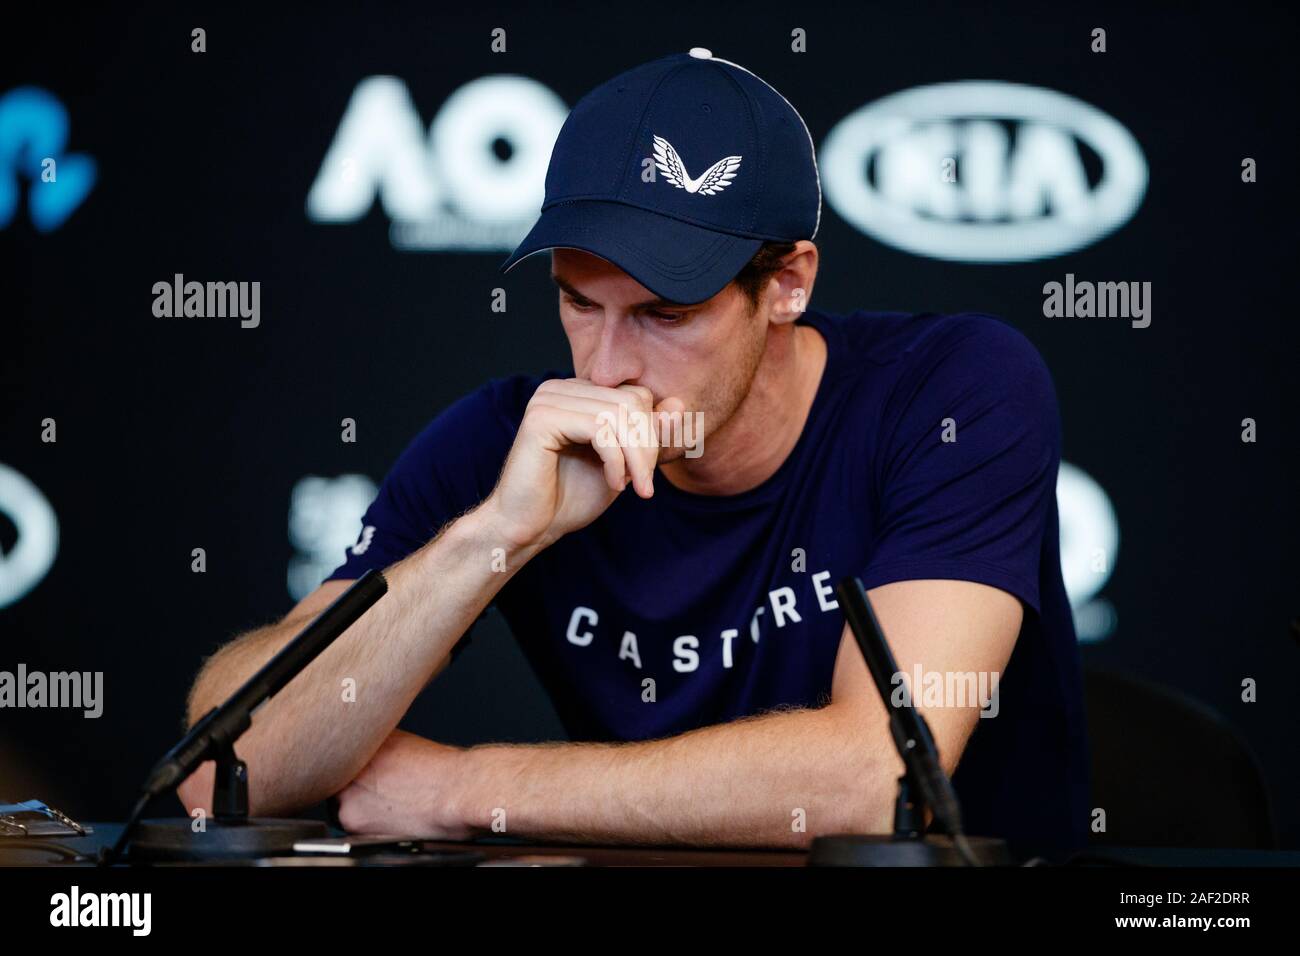 Andy Murray at the beginning of the 2019 Australian Open emotionally announces his last showing at the grand slam due to persistent injuries. Stock Photo